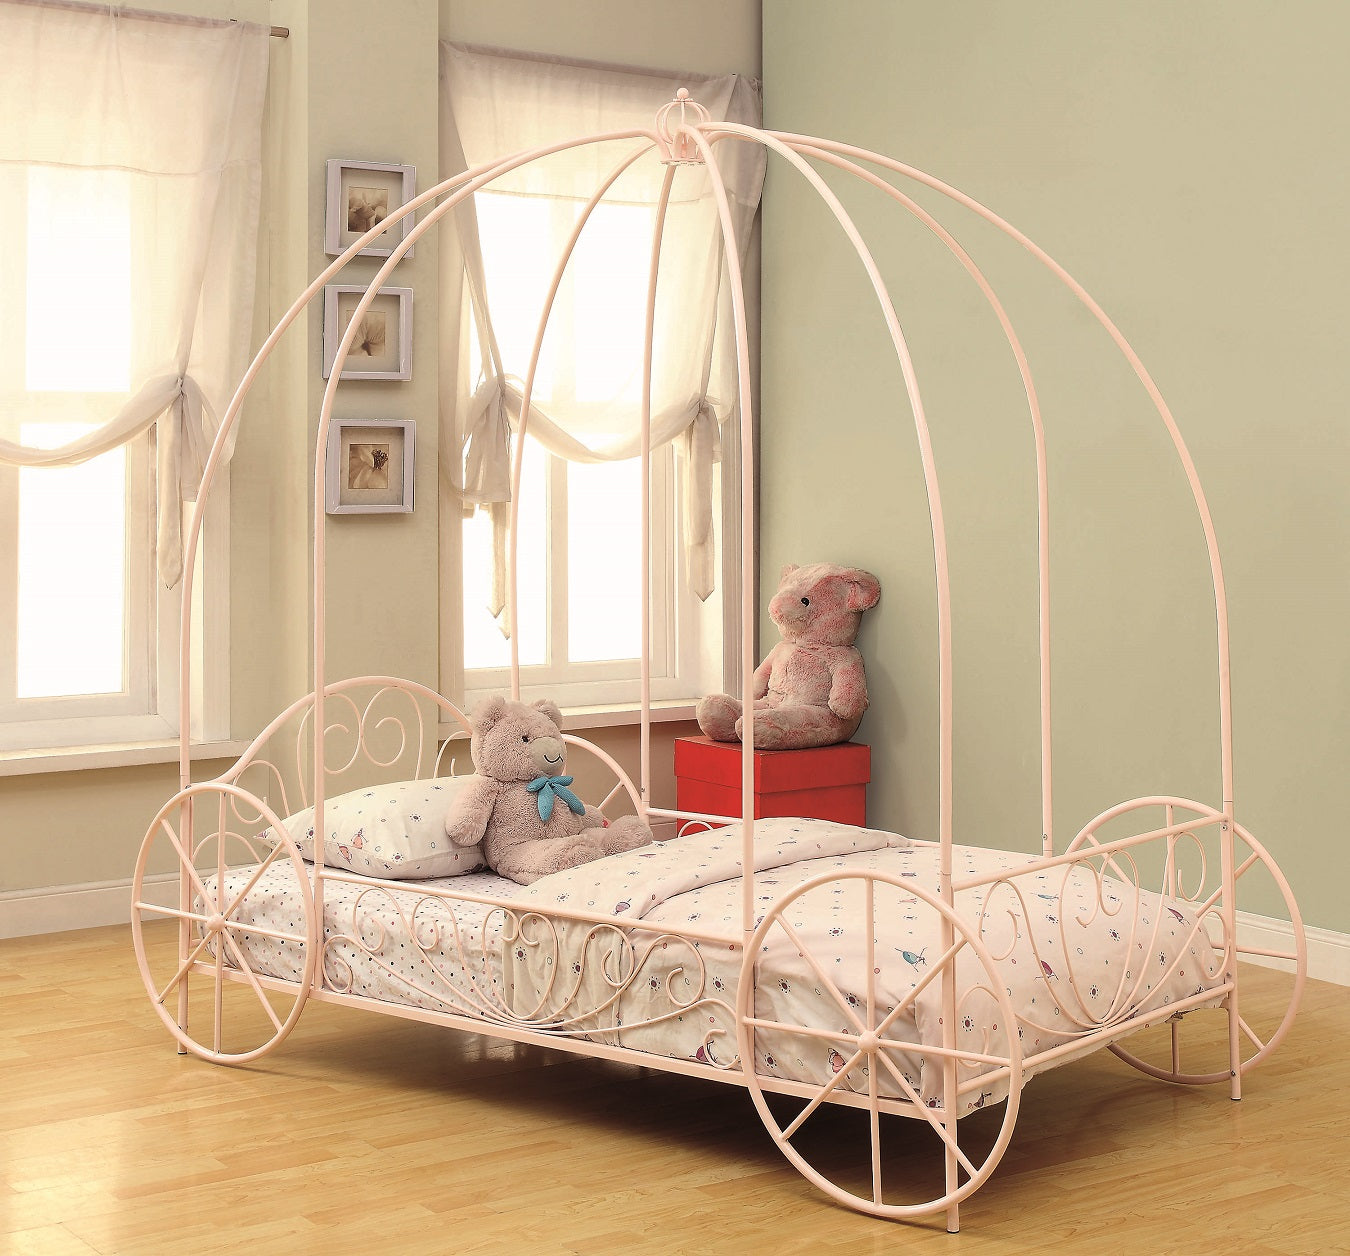 Twin Massi Princess Carriage Canopy Platform Bed Frame by Coaster